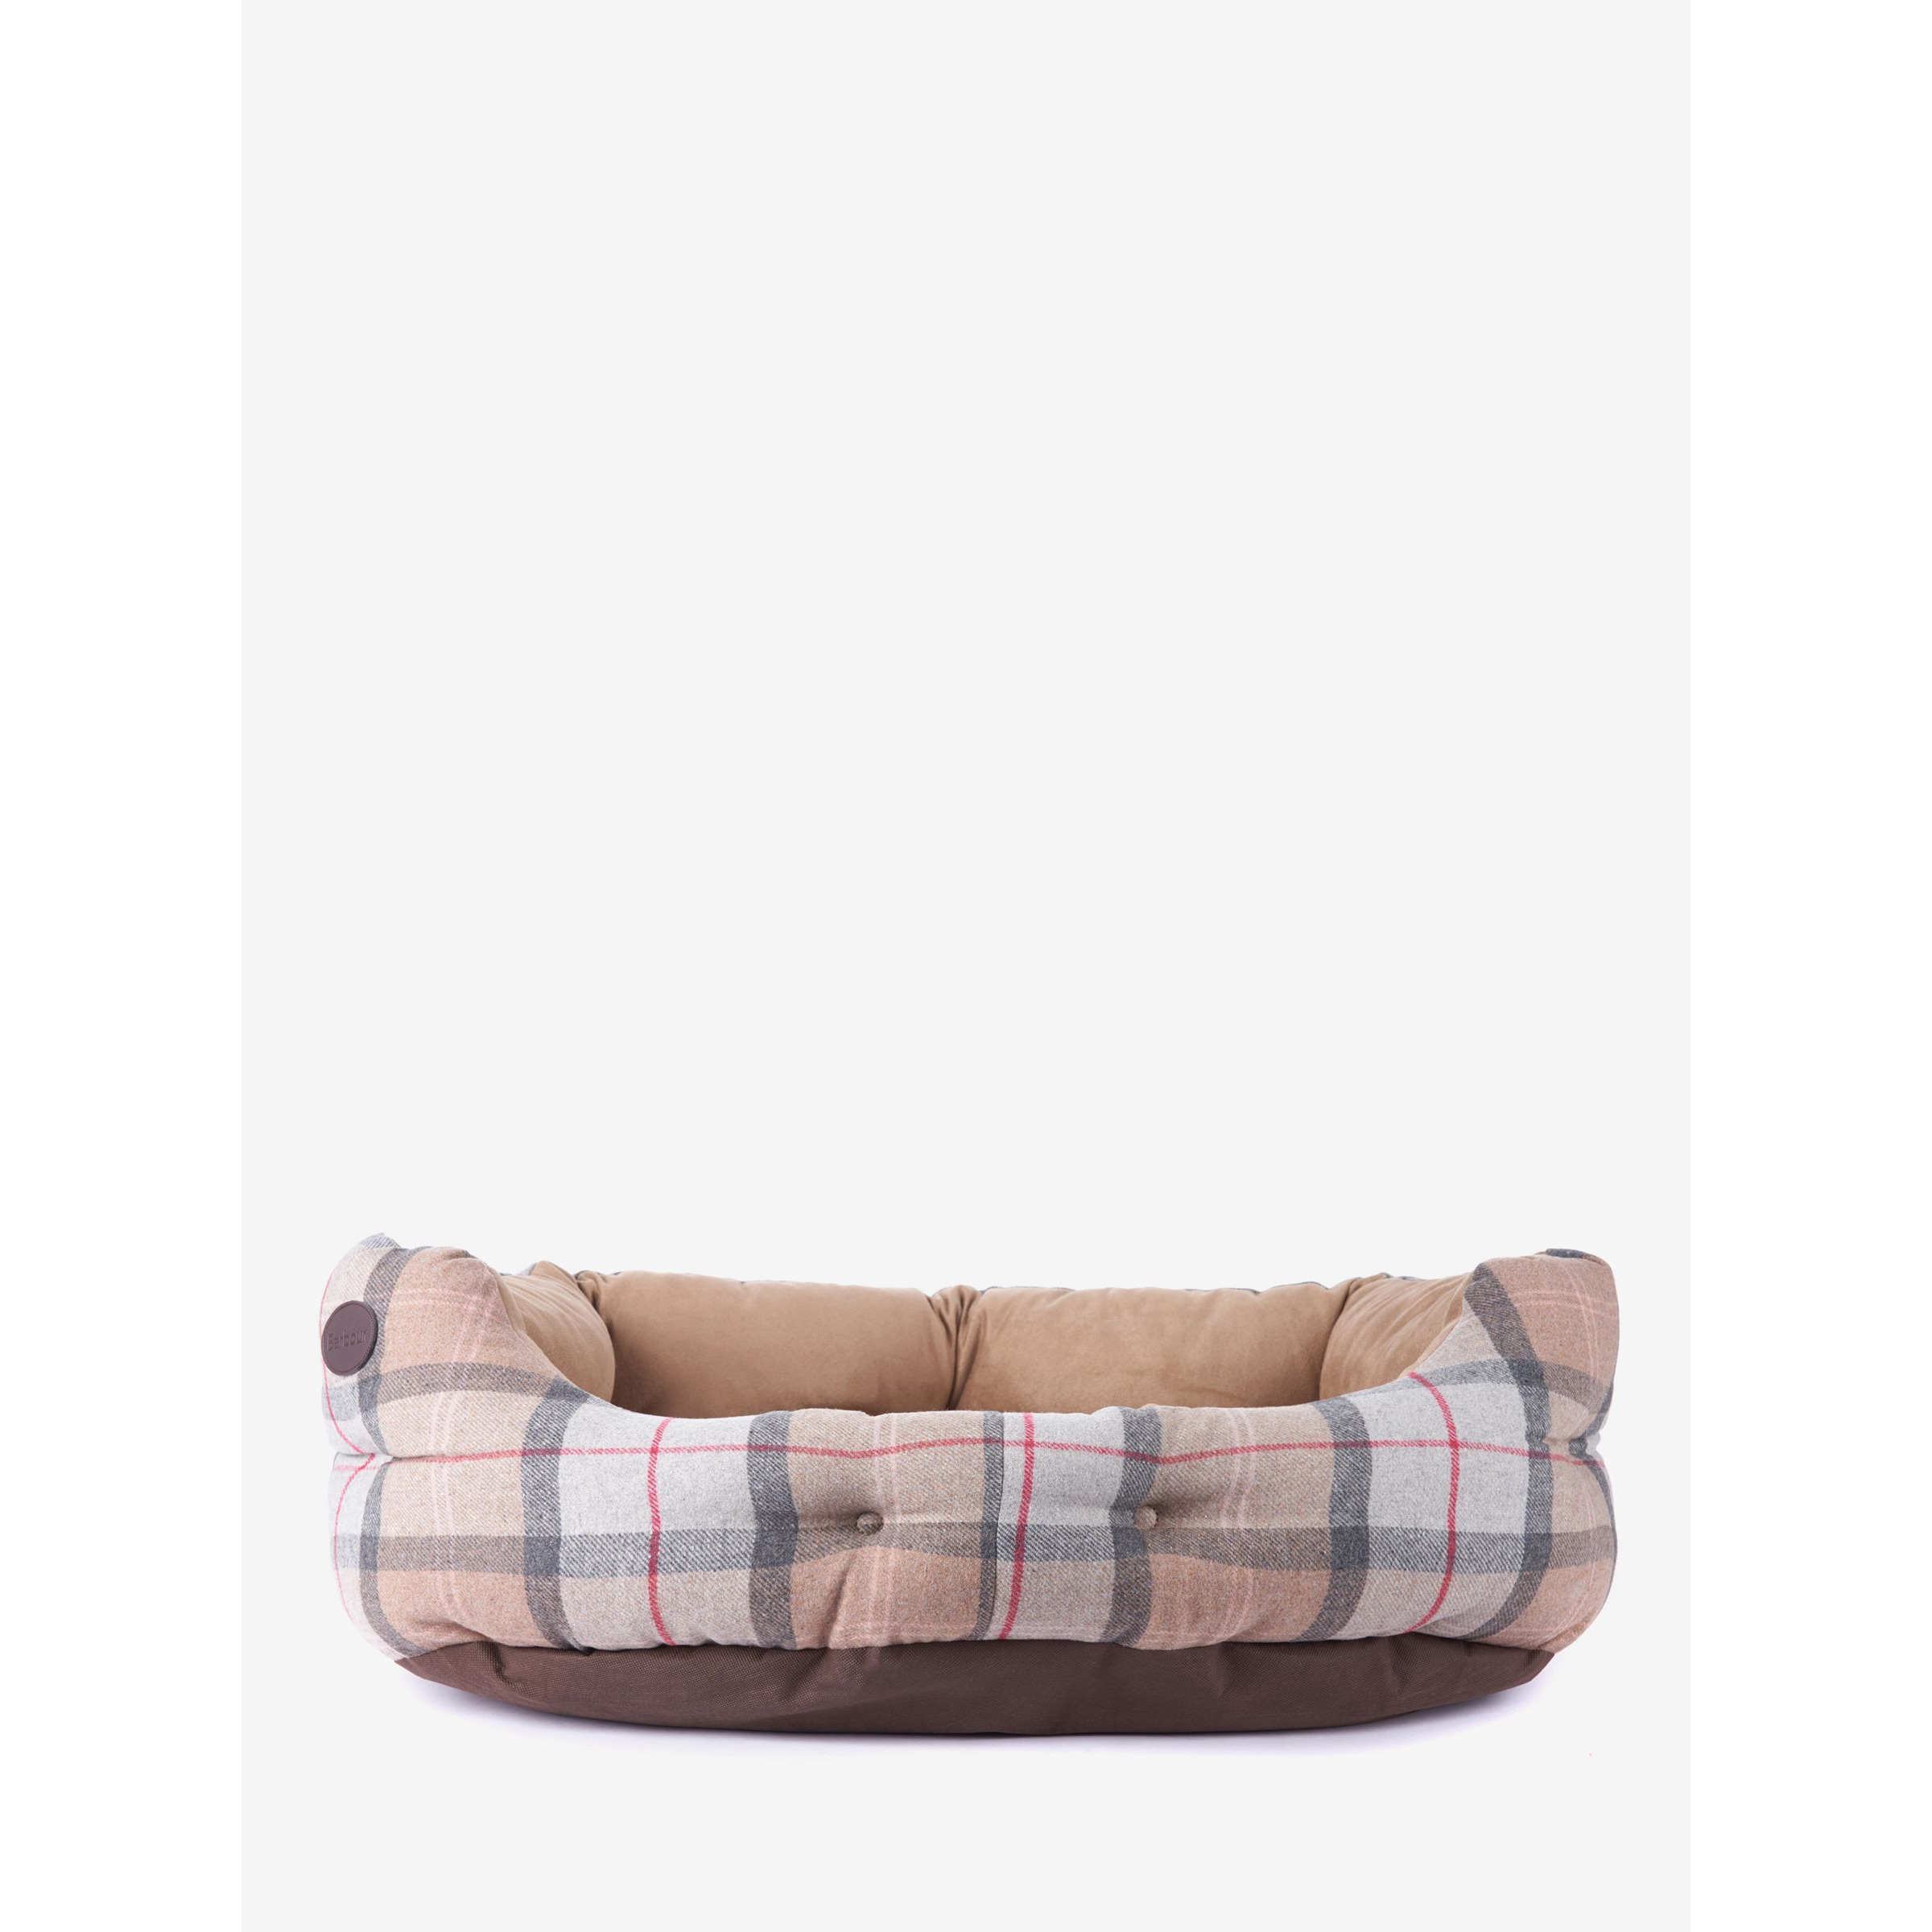 Barbour Pink Luxury Dog Bed - image 1